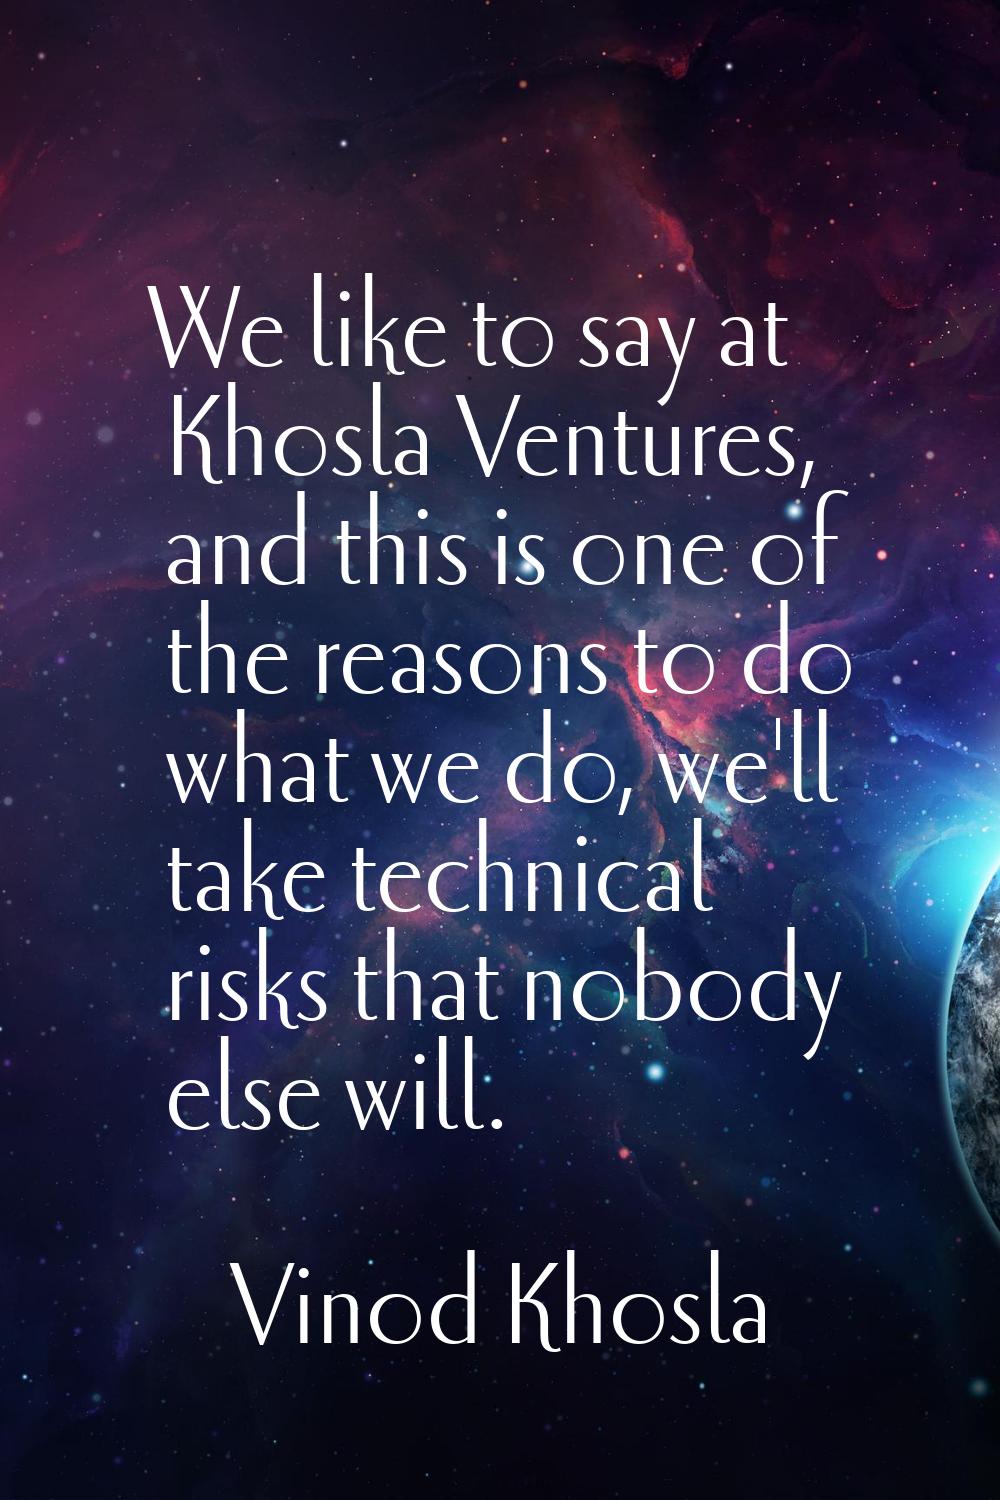 We like to say at Khosla Ventures, and this is one of the reasons to do what we do, we'll take tech